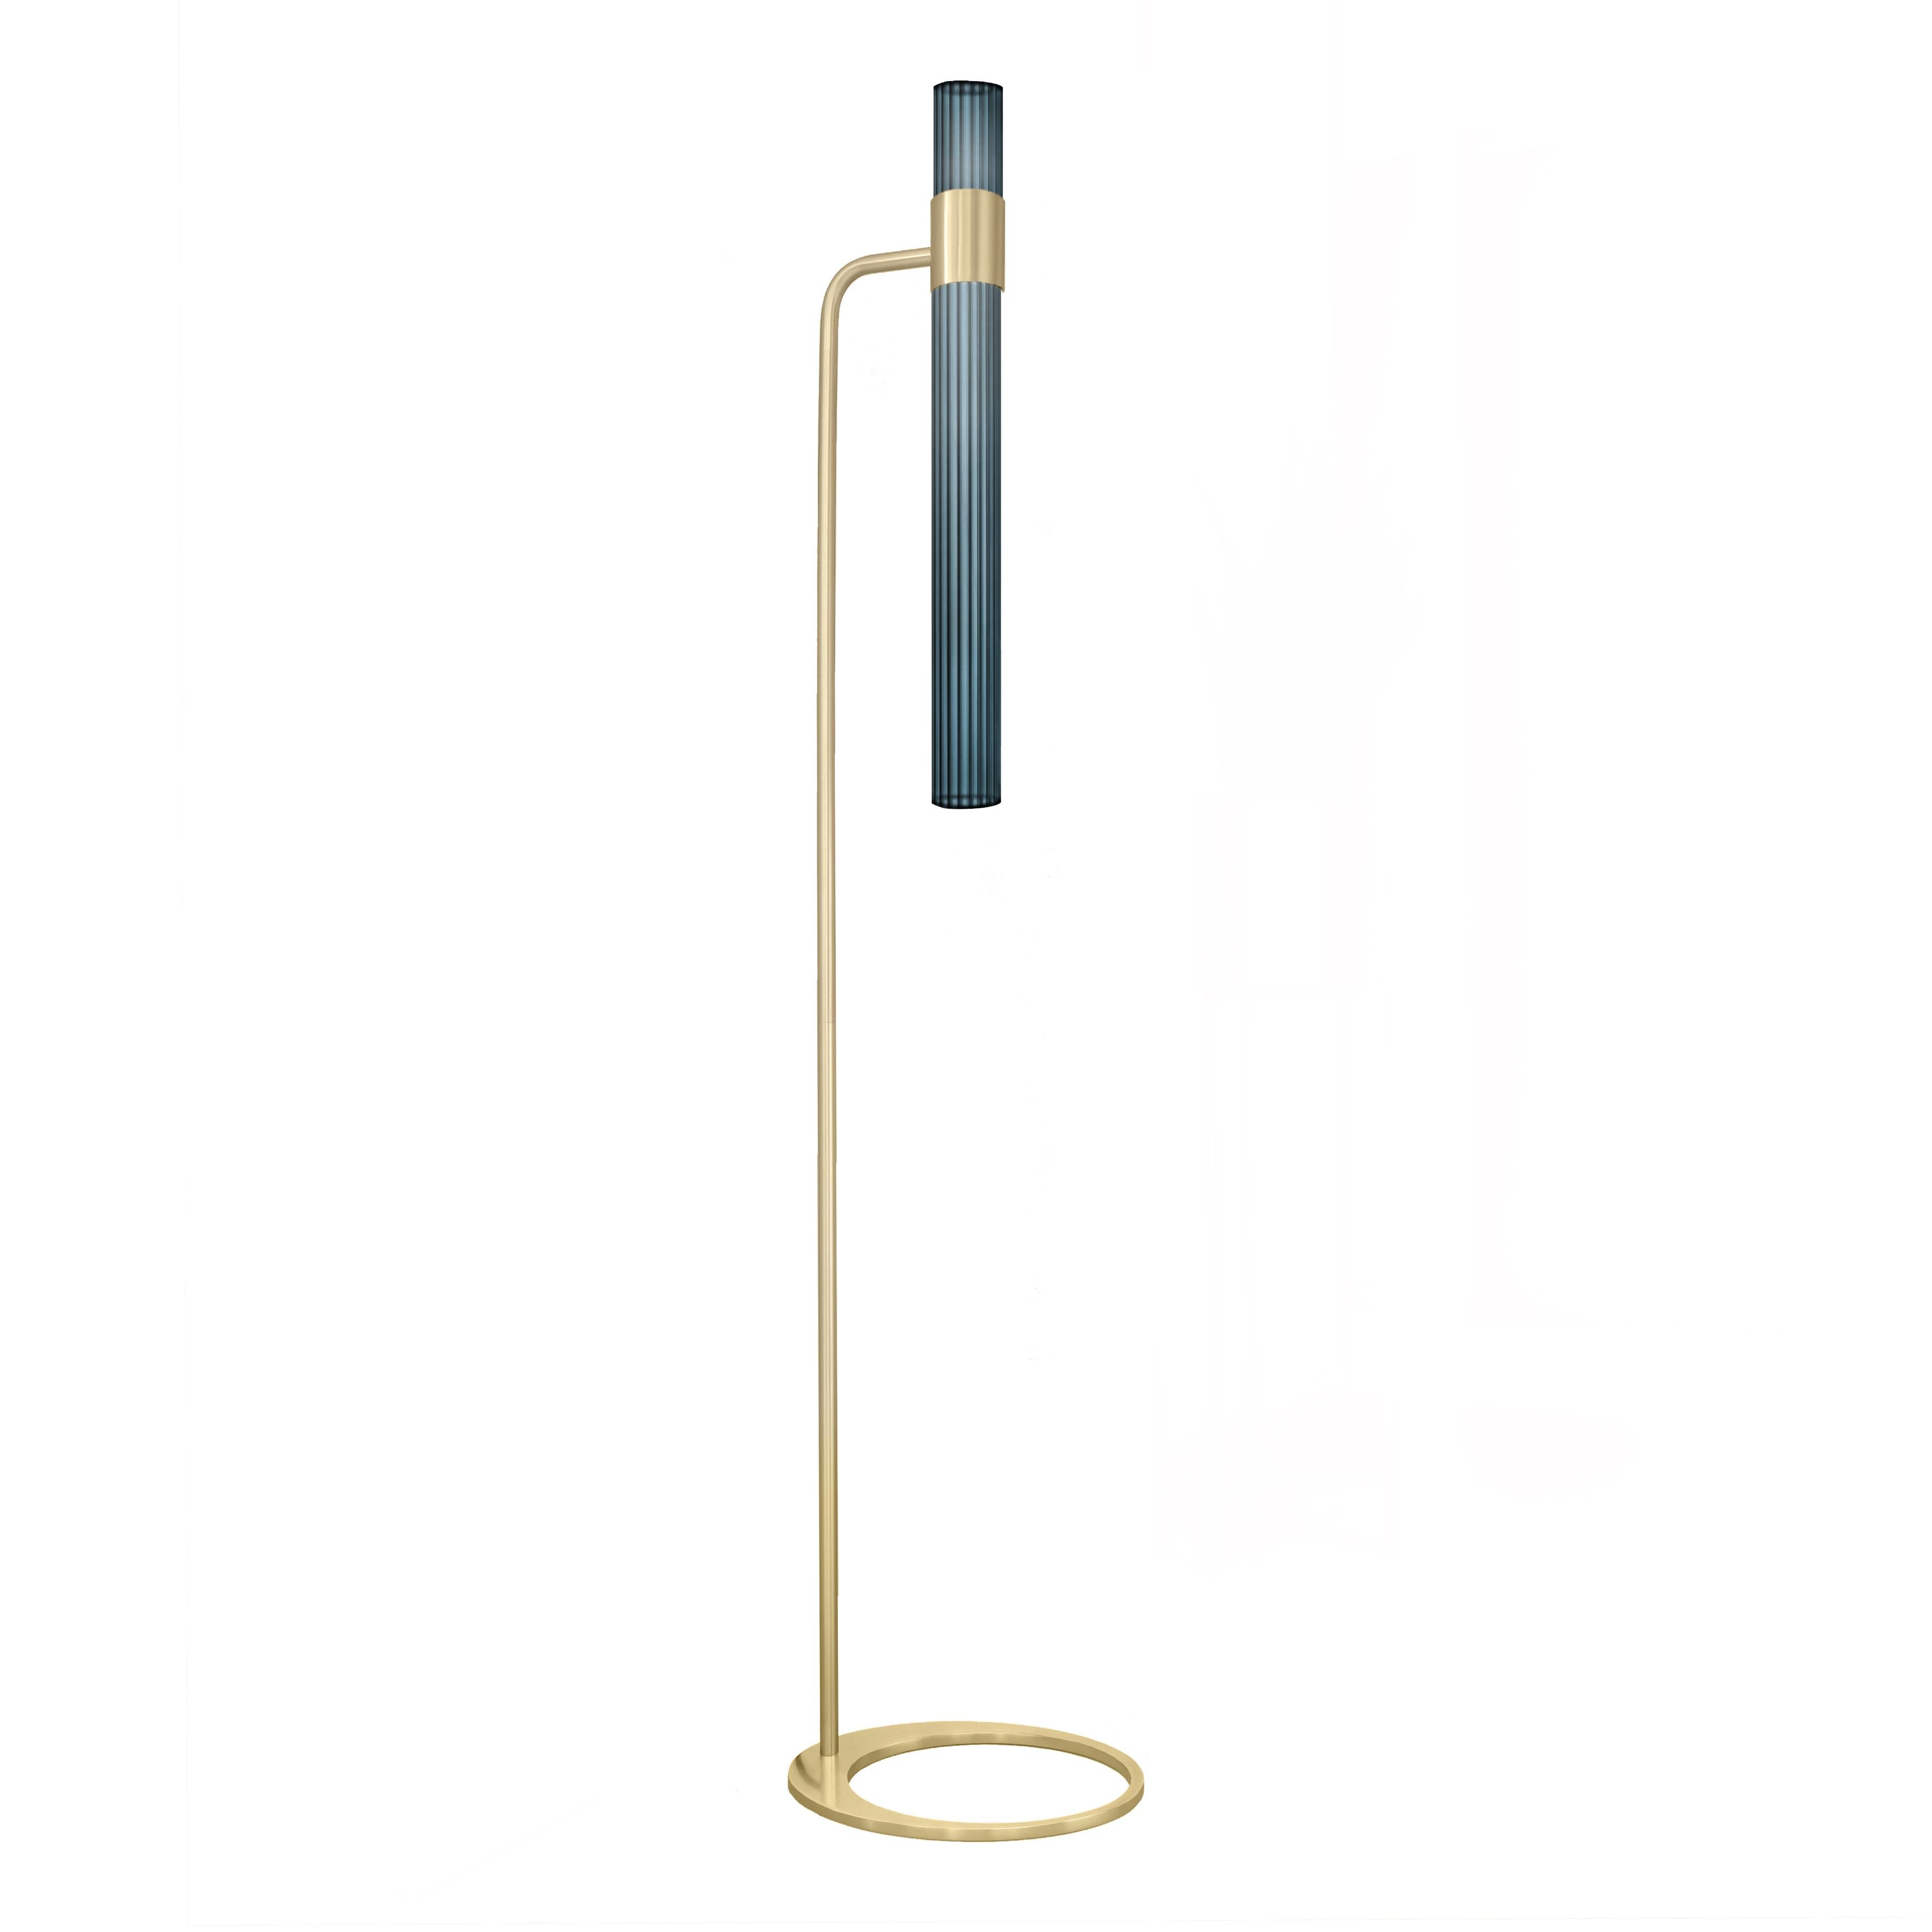 Sbarlusc floor lamp by Luce Tu.
Dimensions: 149 x 32.5 cm.
Materials: brass and glass.

Sbarlusc in Milanese dialect represents the sparkle of a precious and very bright object. The colored glasses, which combine with each other creating games